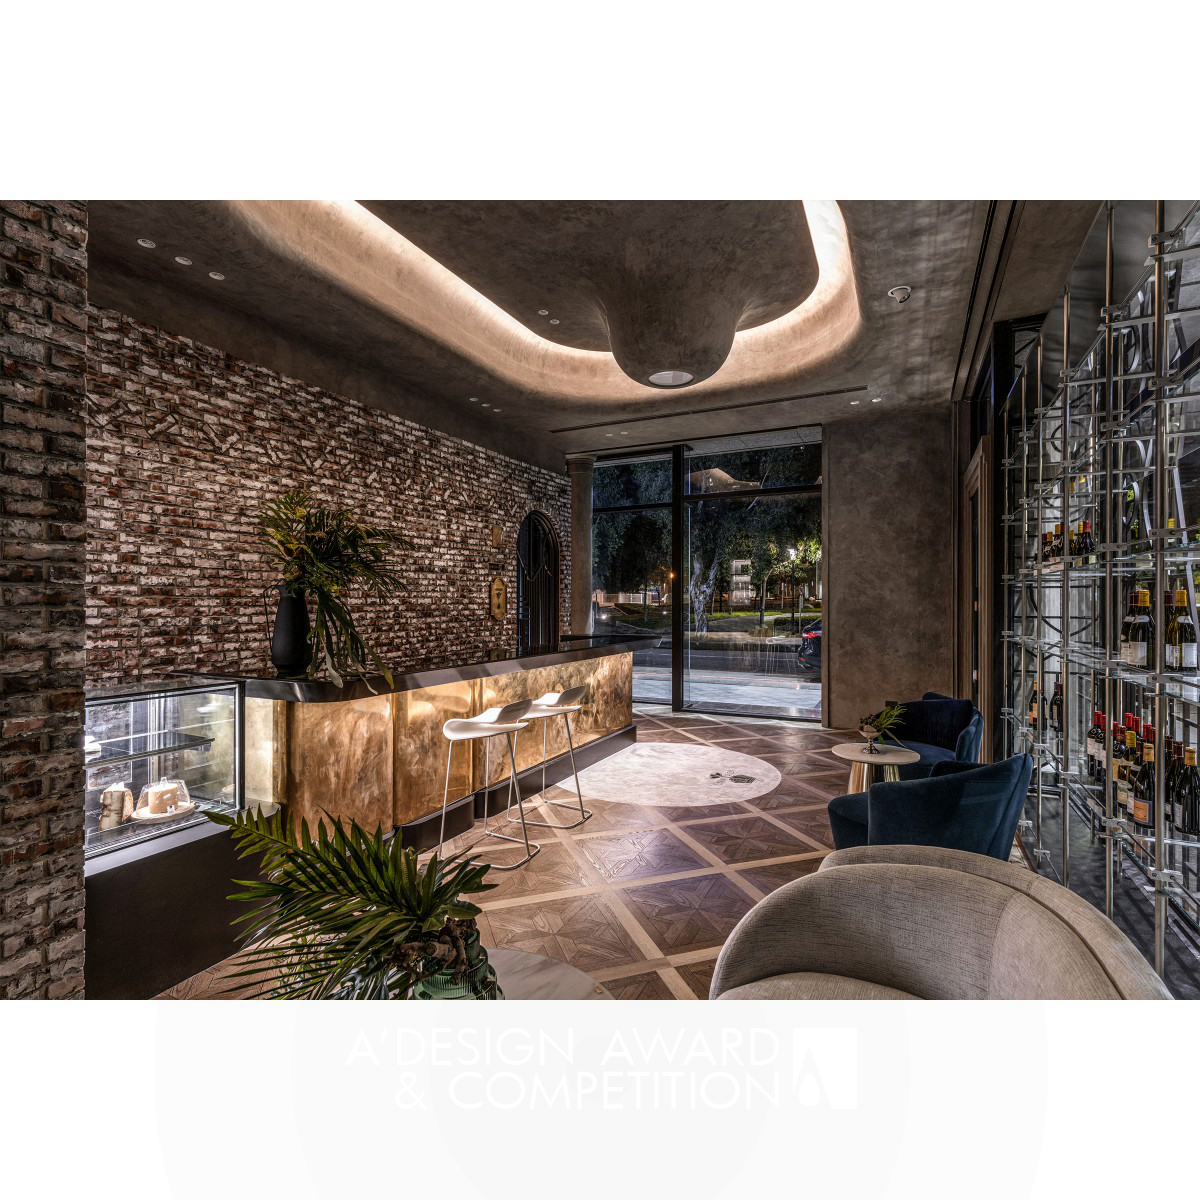 Hsin Ting Weng's "Champion" Wine Cave Design